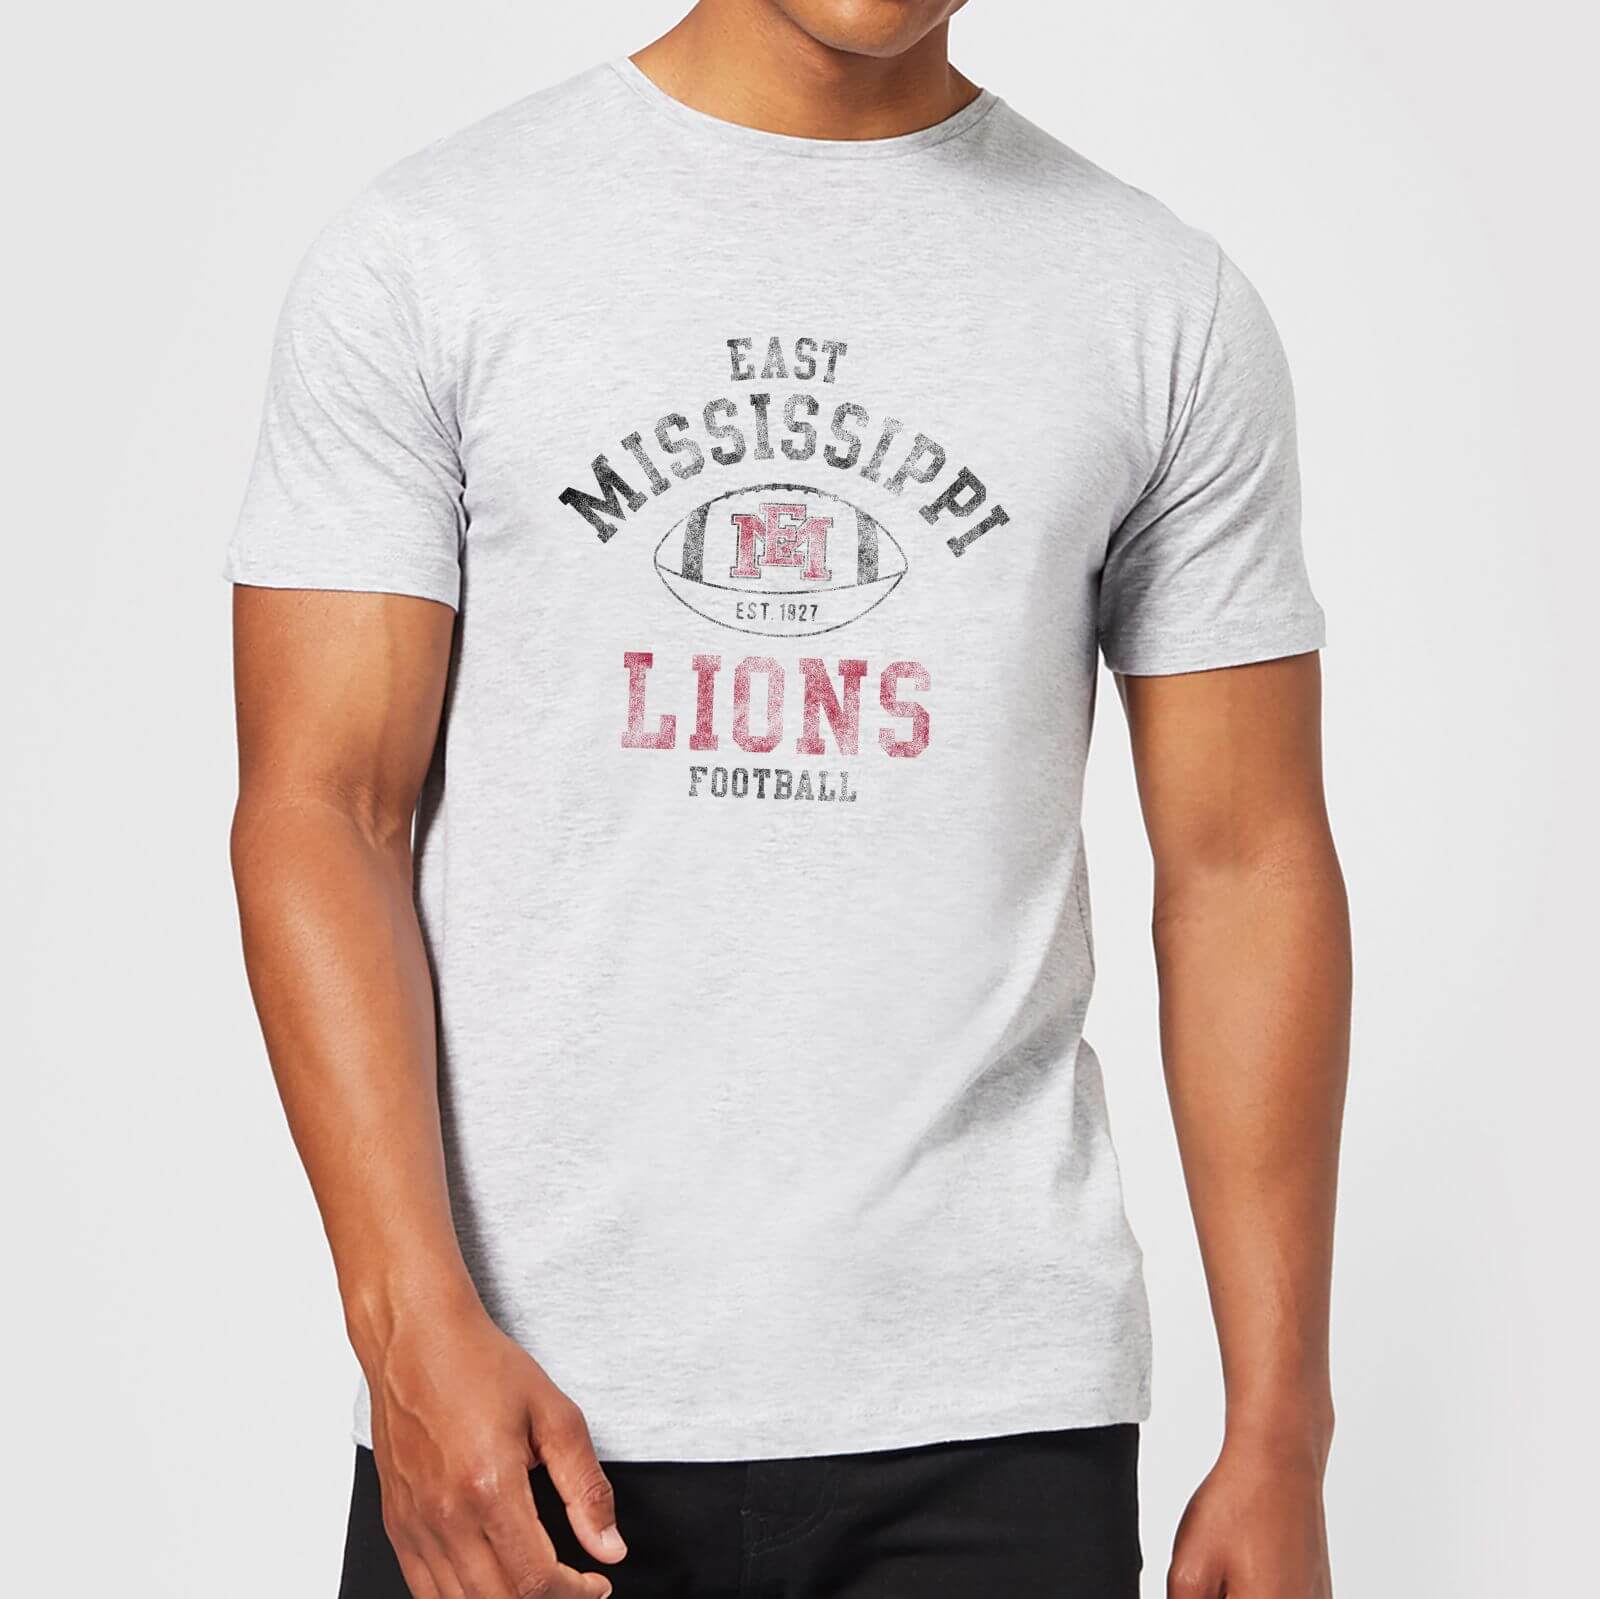 East Mississippi Community College Lions Distressed Football Men's T-Shirt - Grey - S - Grey